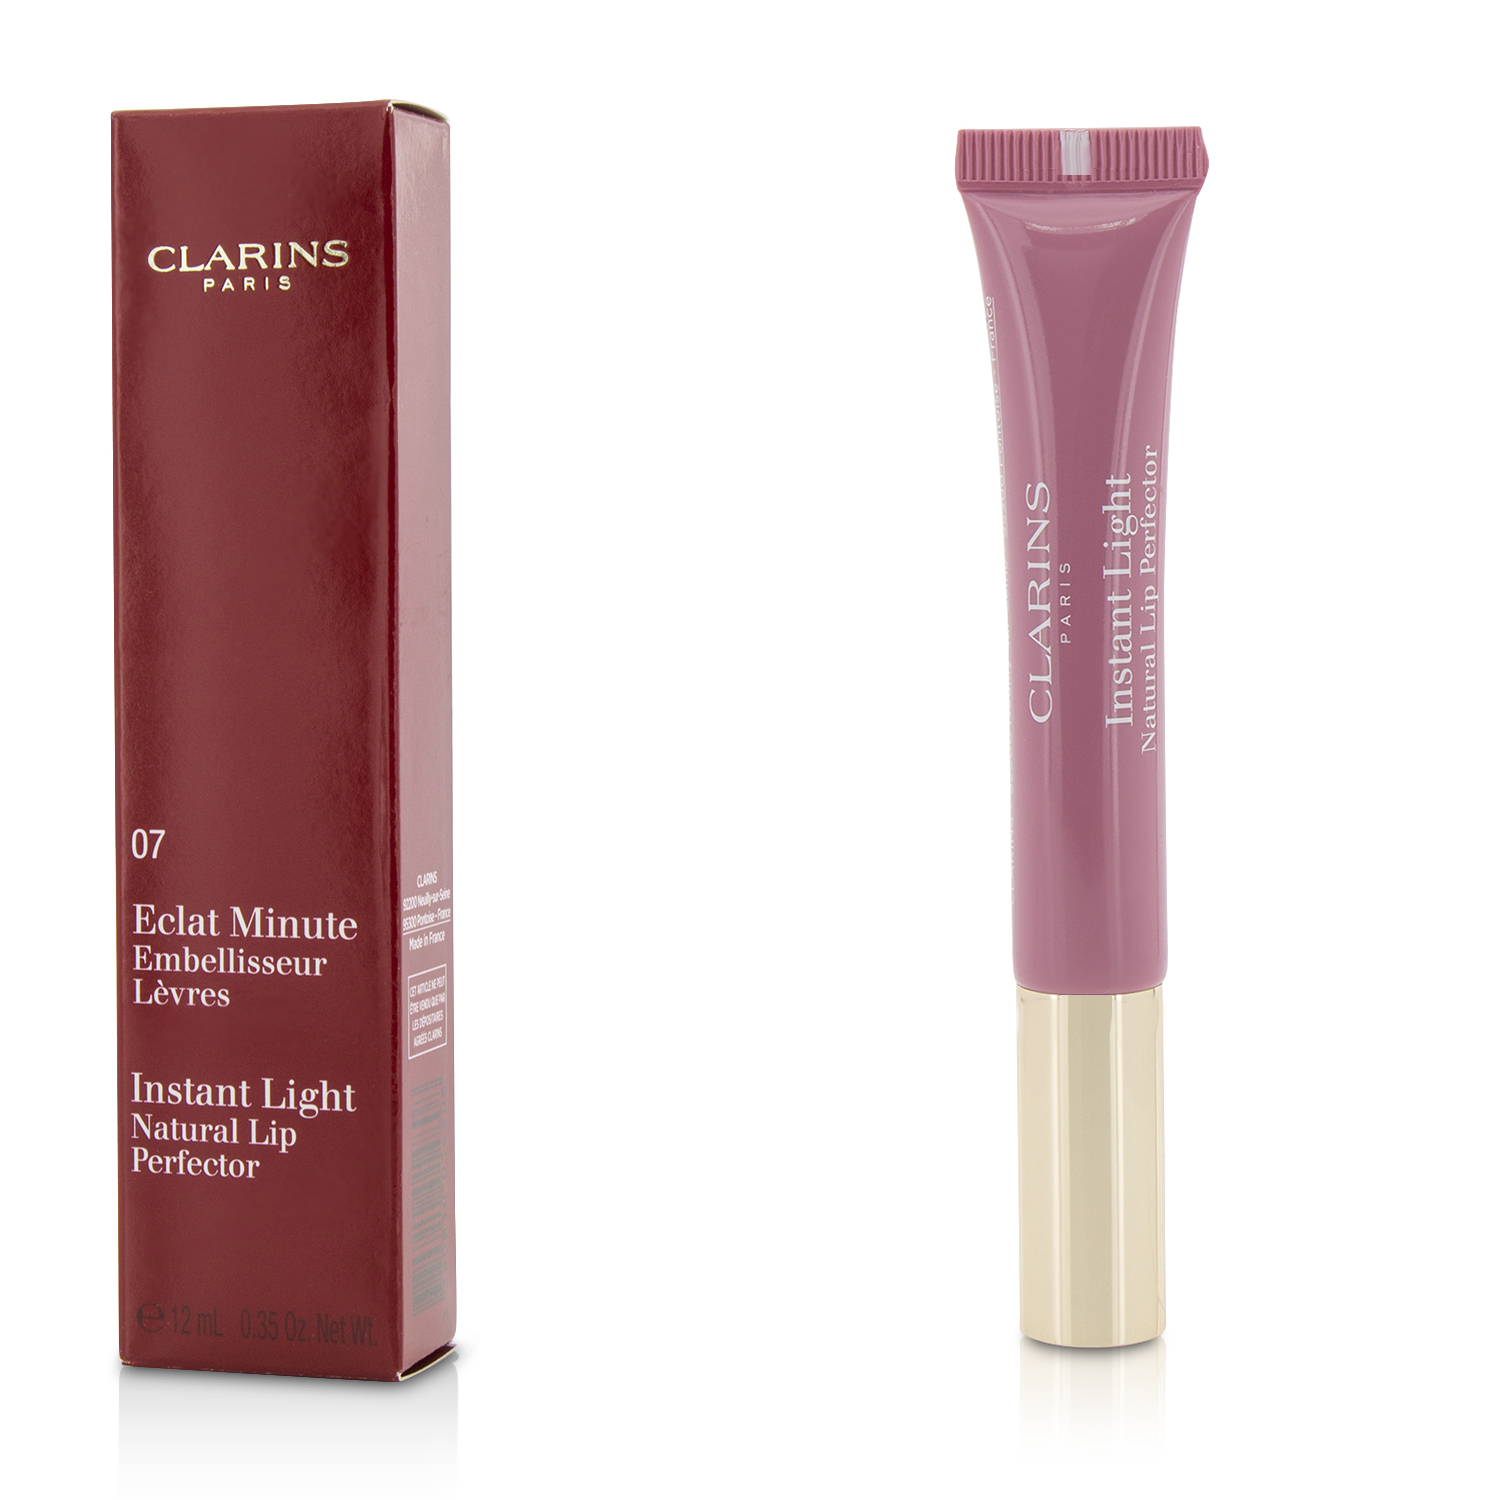 Eclat Minute Instant Light Natural Lip Perfector - # 07 Toffee Pink Shimmer Clarins Image